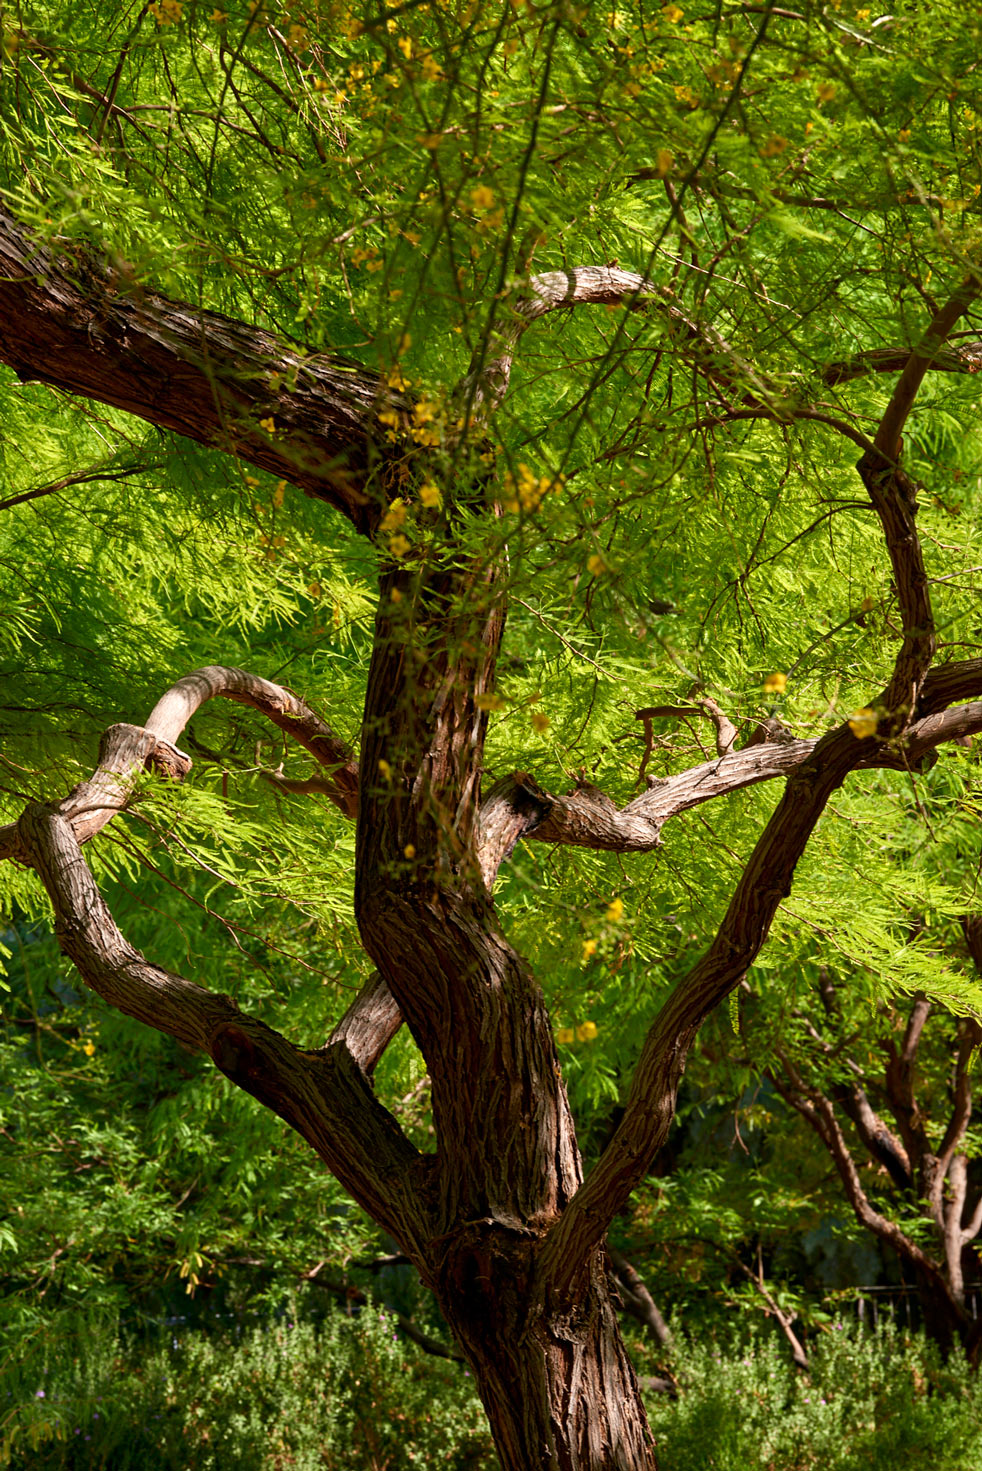 The brown bark of a Mesquite branch with small green leaves.